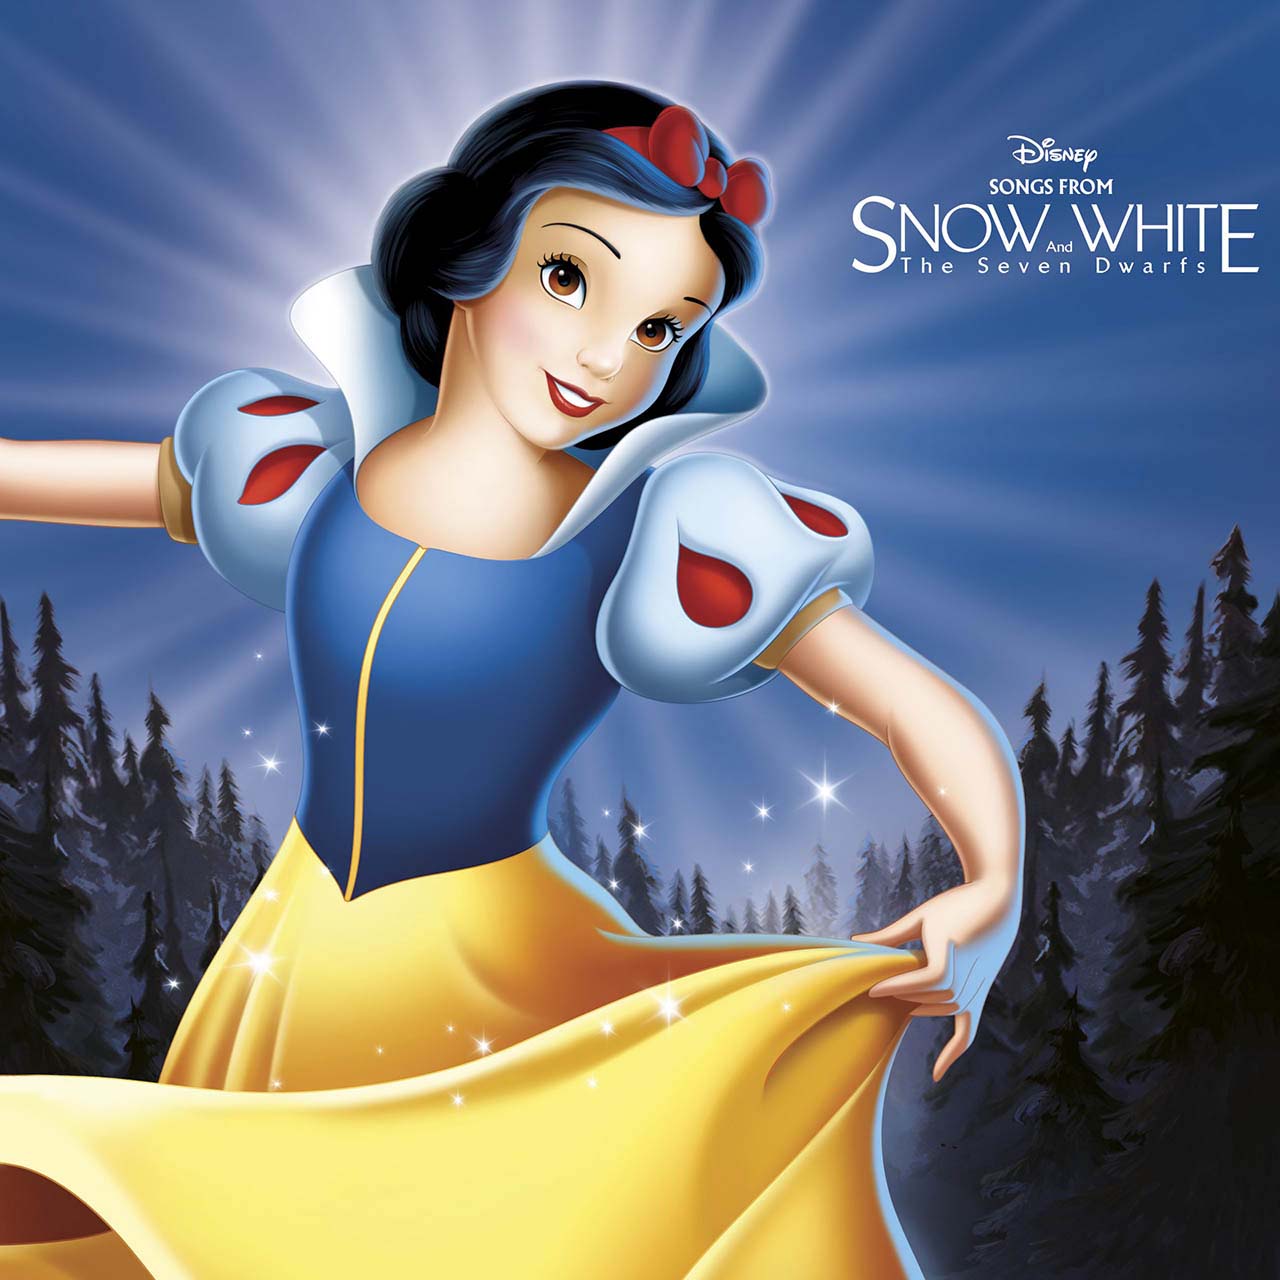 17-facts-about-snow-white-disney